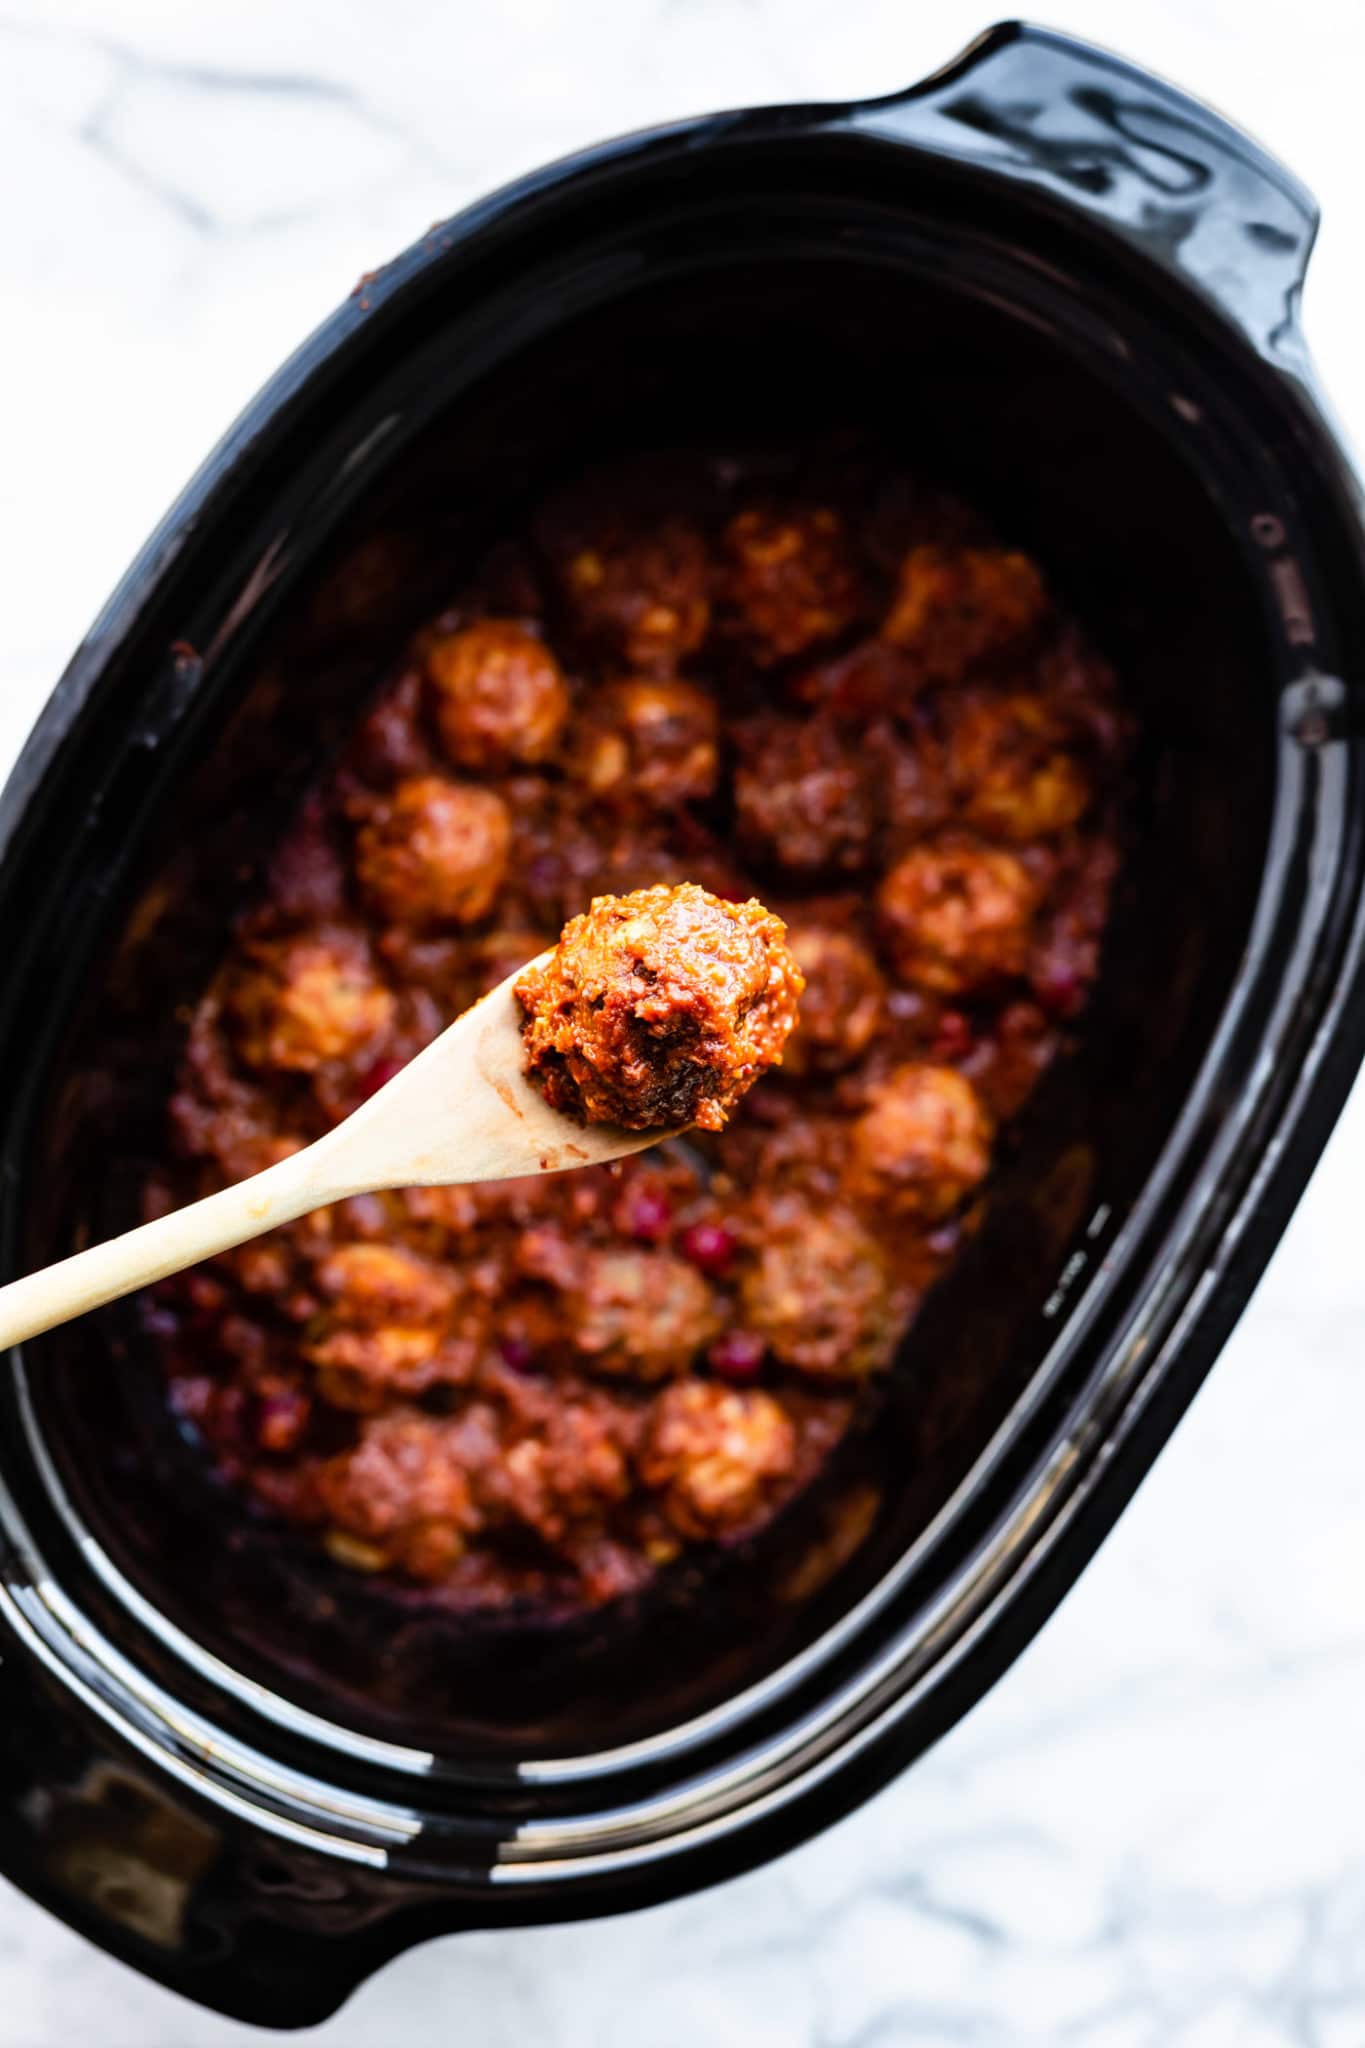 a wooden spoon holding a gluten free meatball over a slow cooker of meatballs